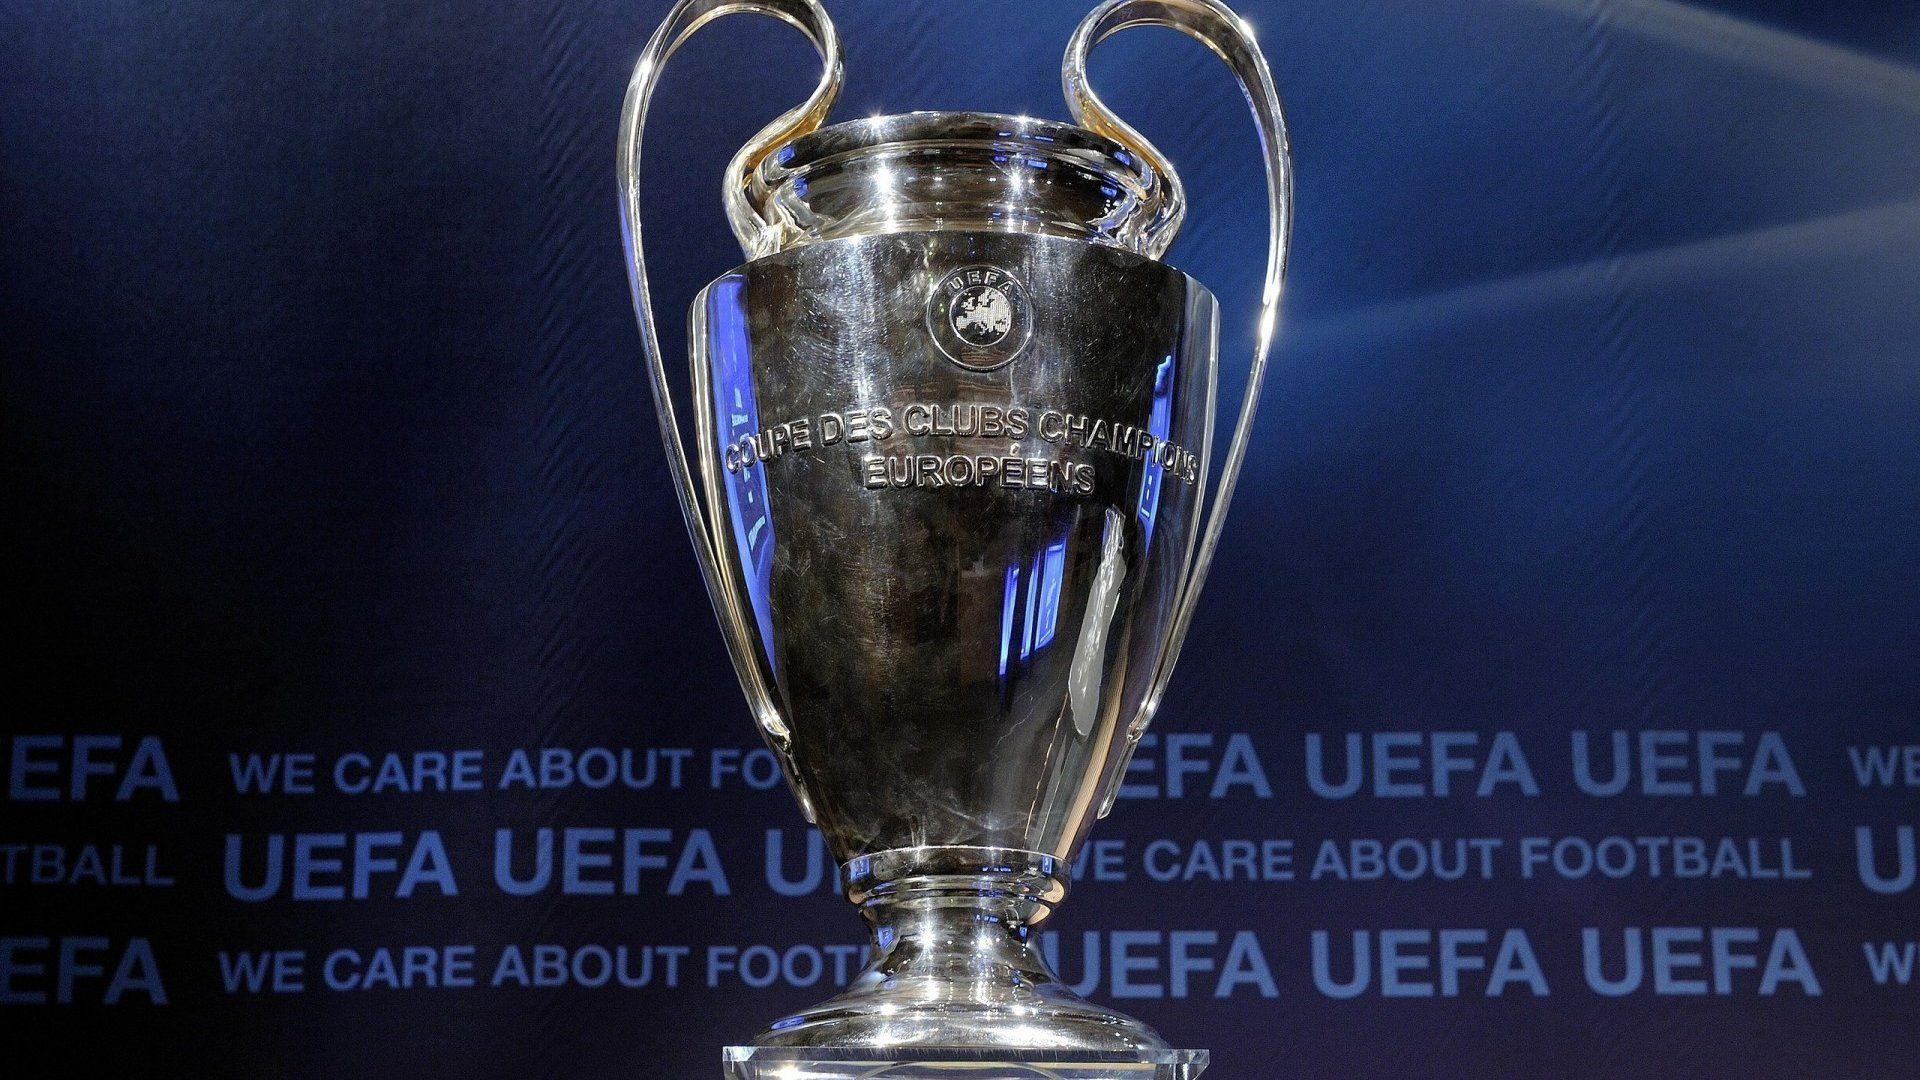 Clubs Most Likely to Win UEFA Champions League, According to